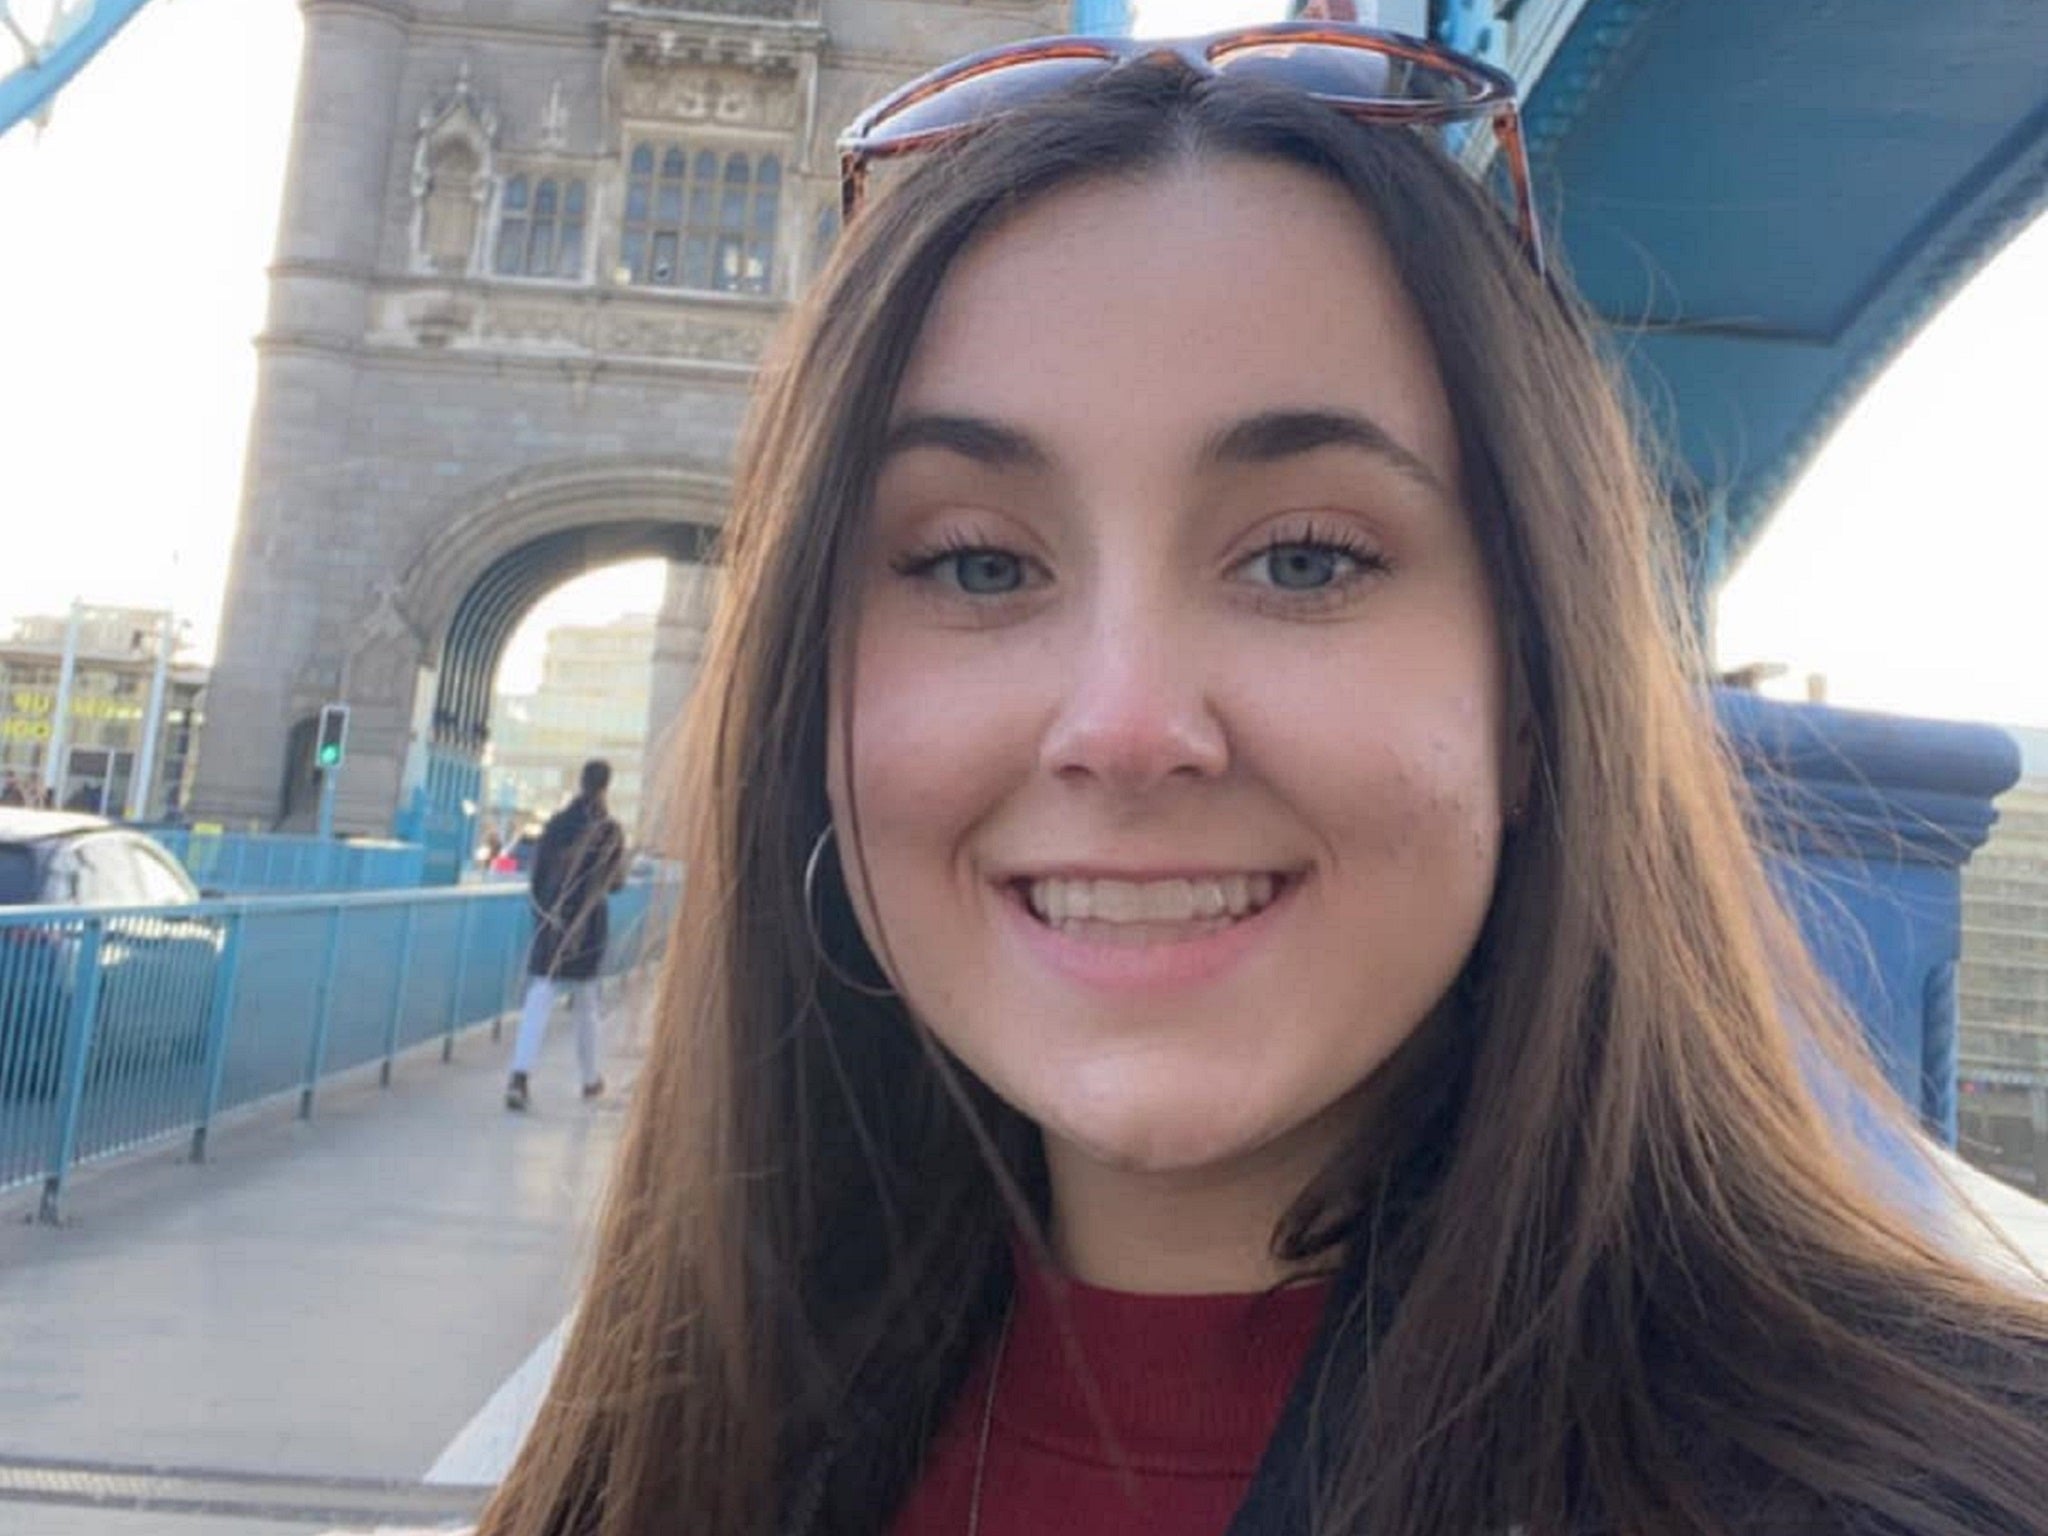 A man has been charged with the murder of Canadian Ashley Wadsworth, 19, after she was found dead in Essex